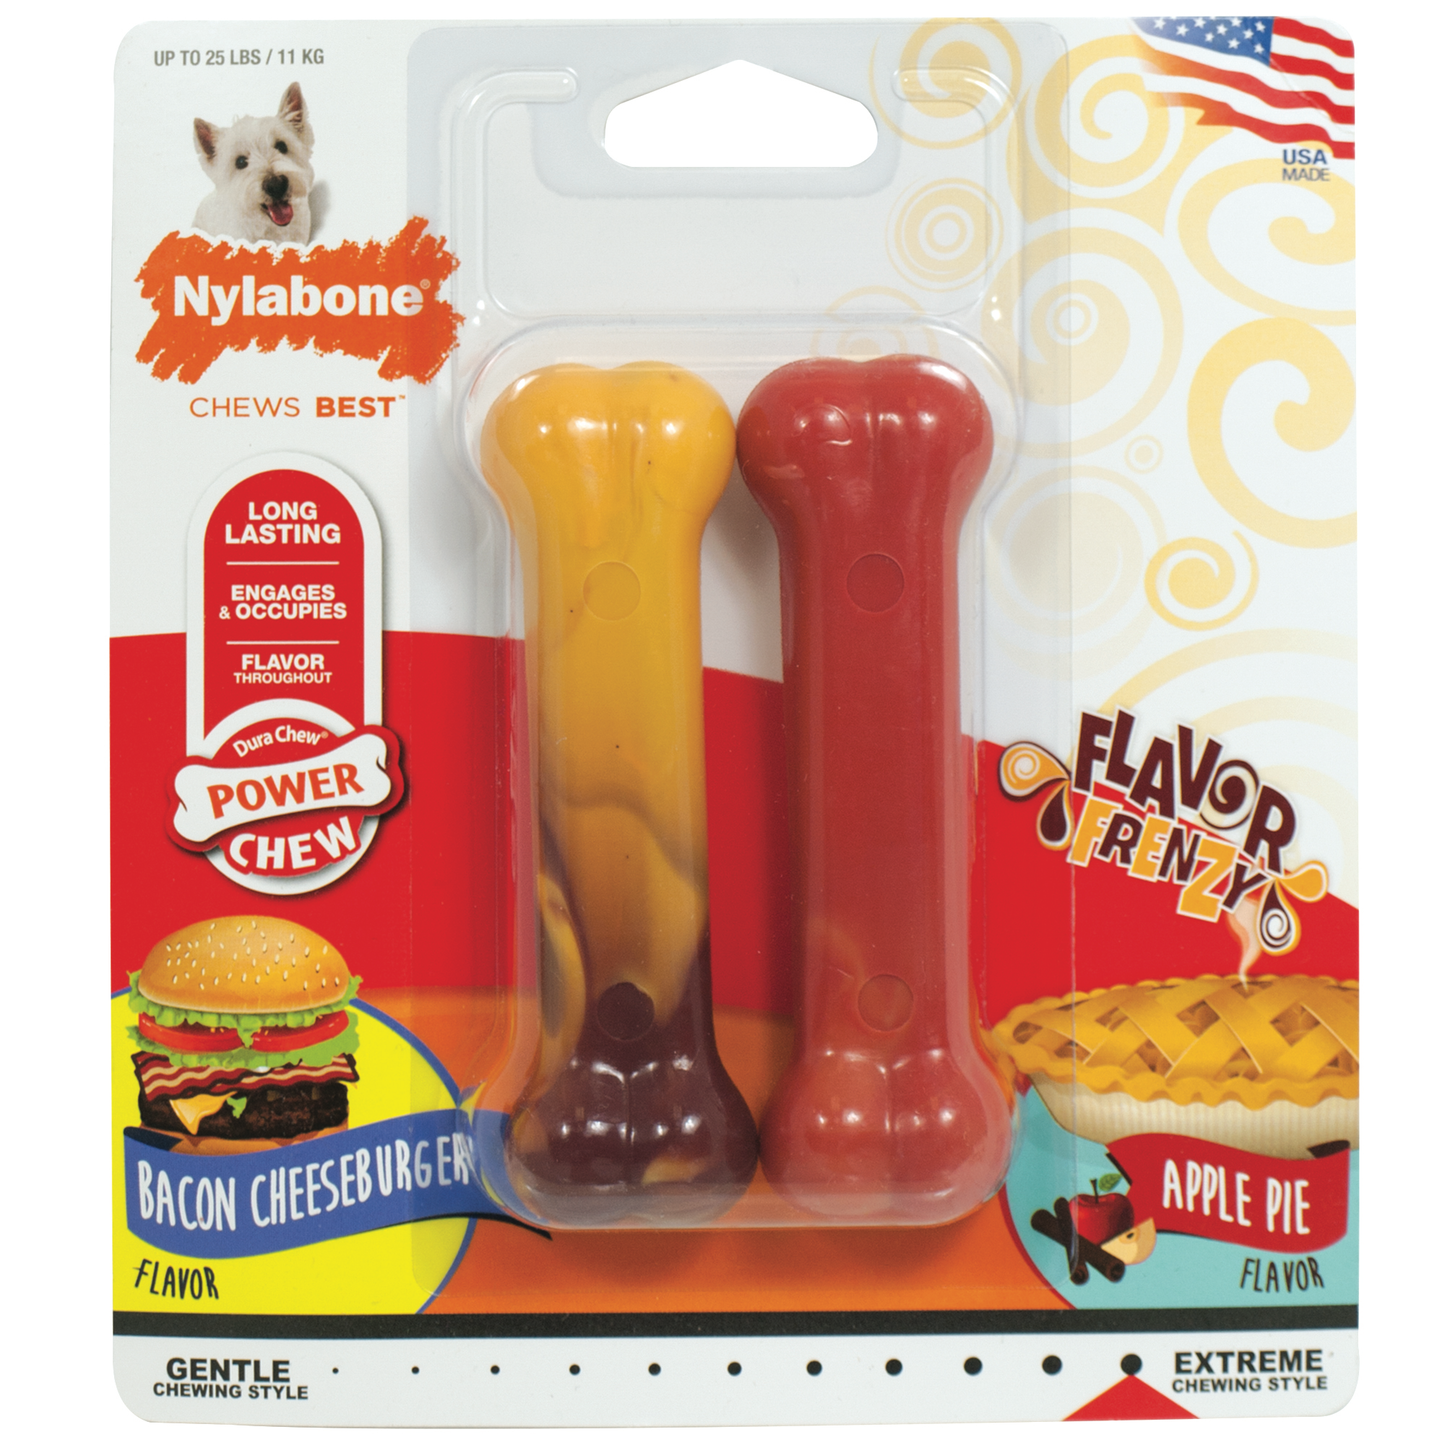 Nylabone Power Chew Flavor Frenzy Durable Dog Chew Toys Twin Pack Bacon Cheeseburger & Apple Pie Small/Regular